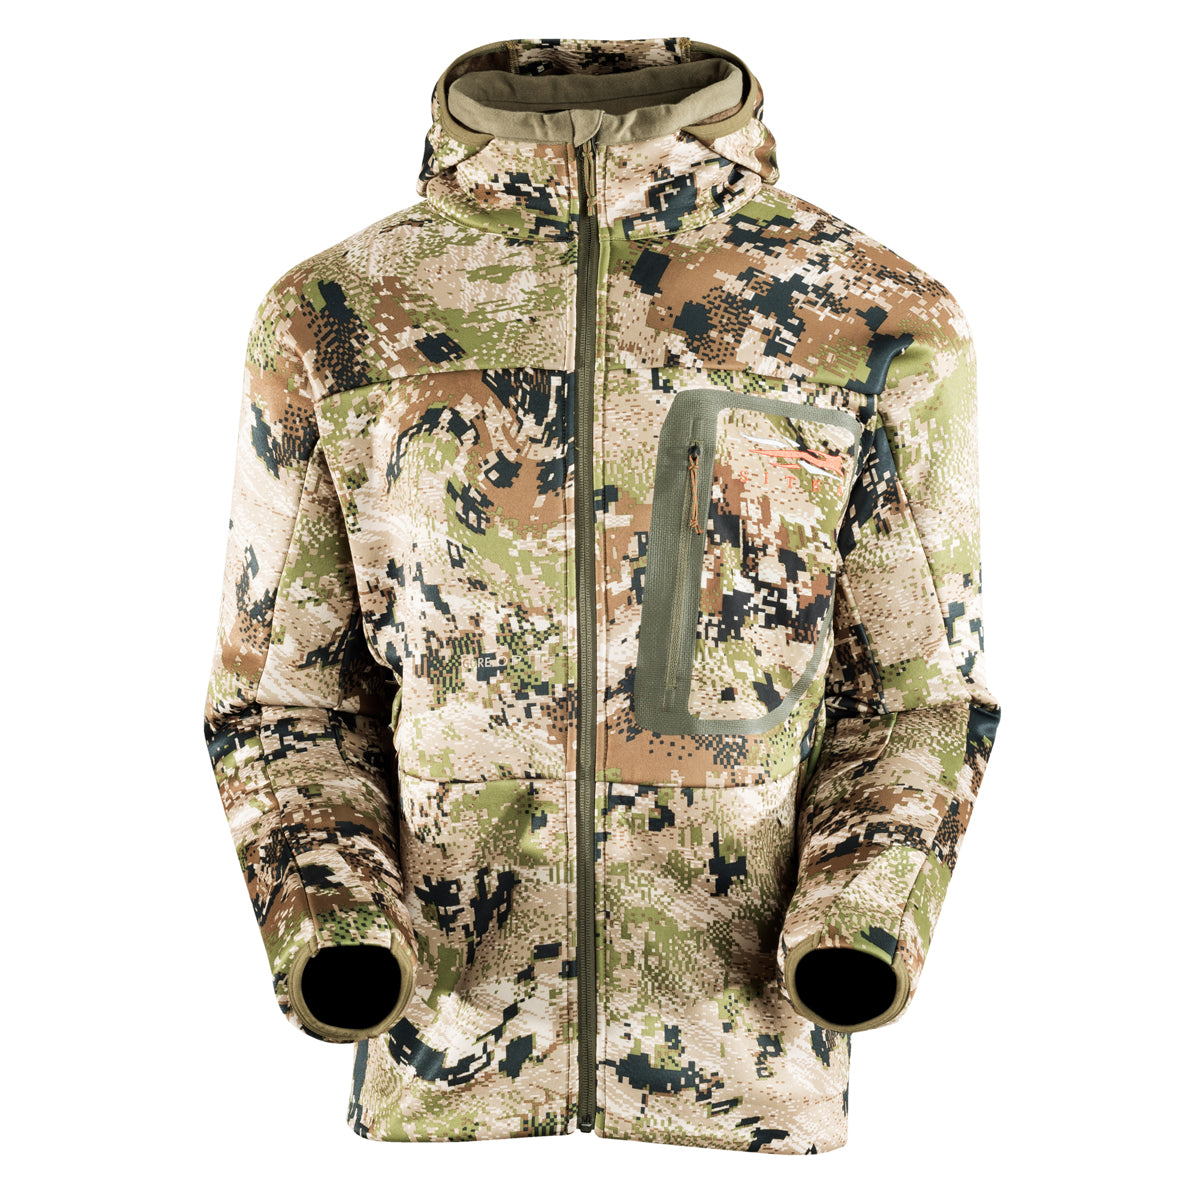 Sitka Traverse Cold Weather Hoody in Sitka Traverse Cold Weather Hoody by Sitka | Apparel - goHUNT Shop by GOHUNT | Sitka - GOHUNT Shop